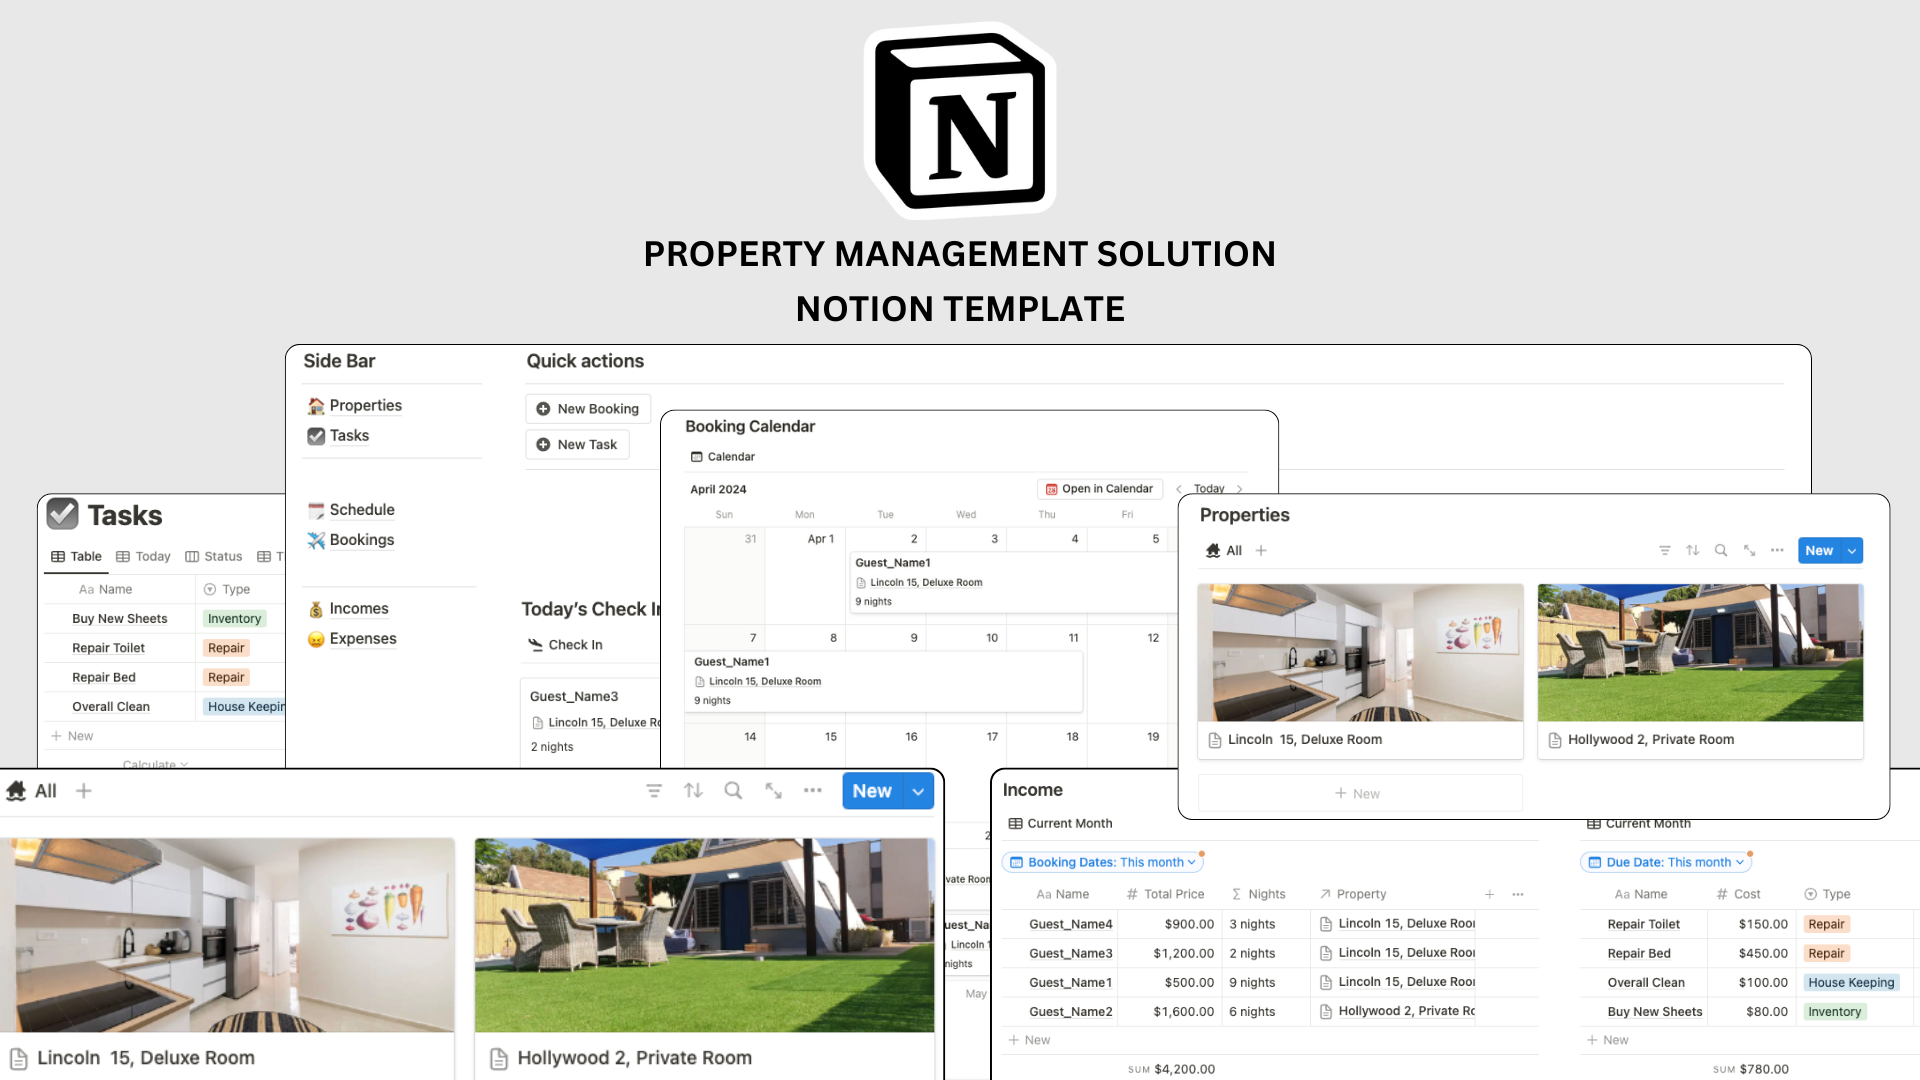 Streamline your Airbnb business effortlessly with our Notion template. Effortlessly track bookings, tasks, income, and expenses in one place. Plus, our flexible infrastructure allows easy addition of new features. Elevate your property management game today!